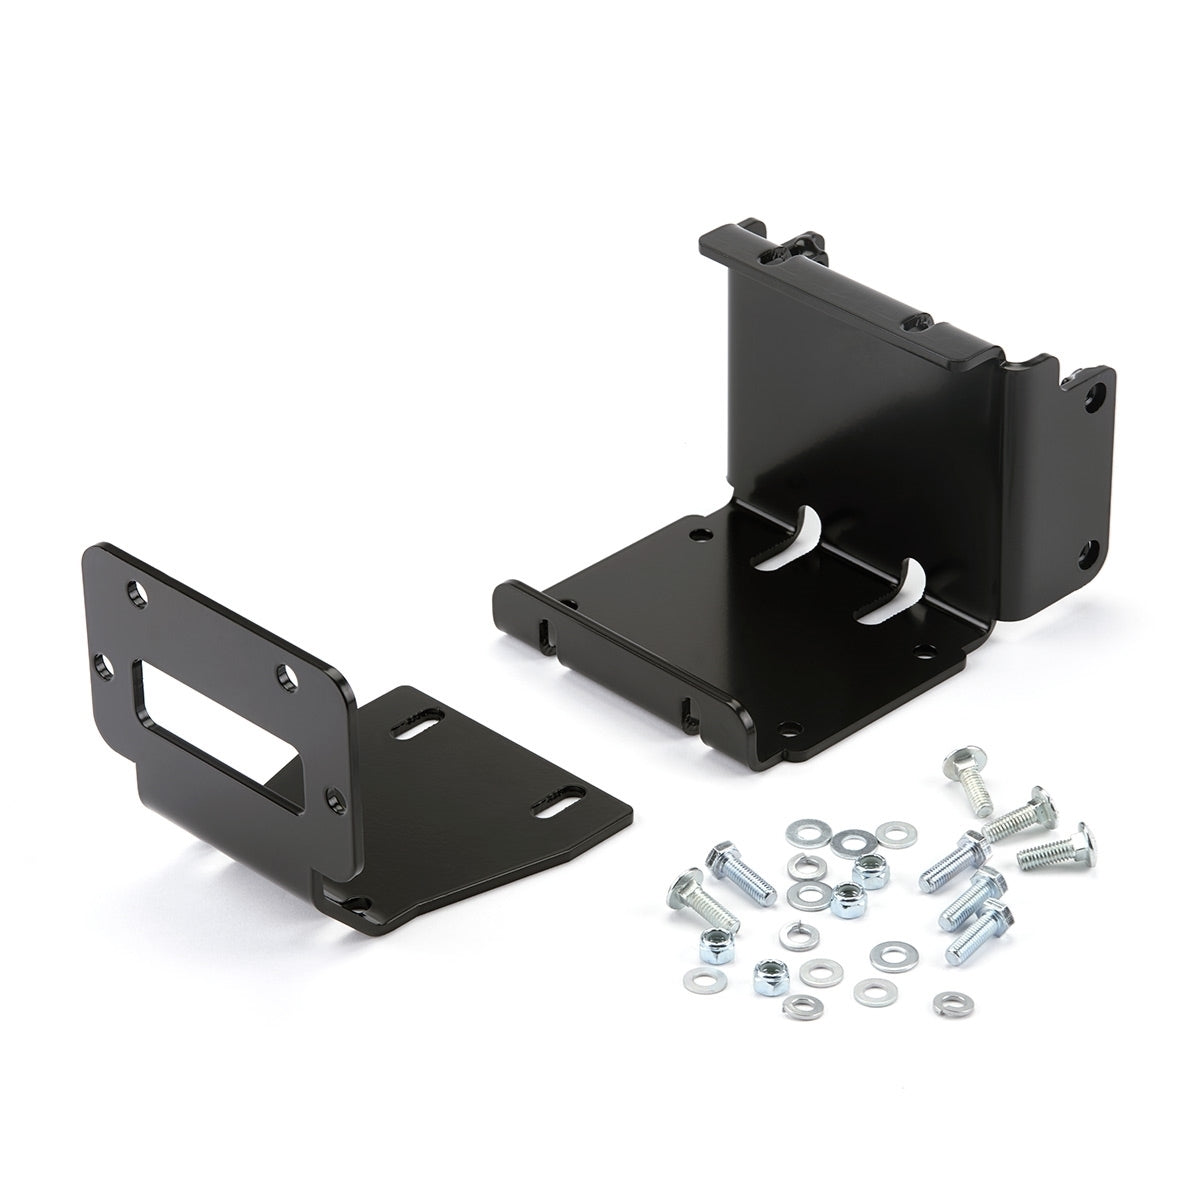 Winch Mounting Kit for Polaris ATVs - Contact Arbil to check for suitability for your model